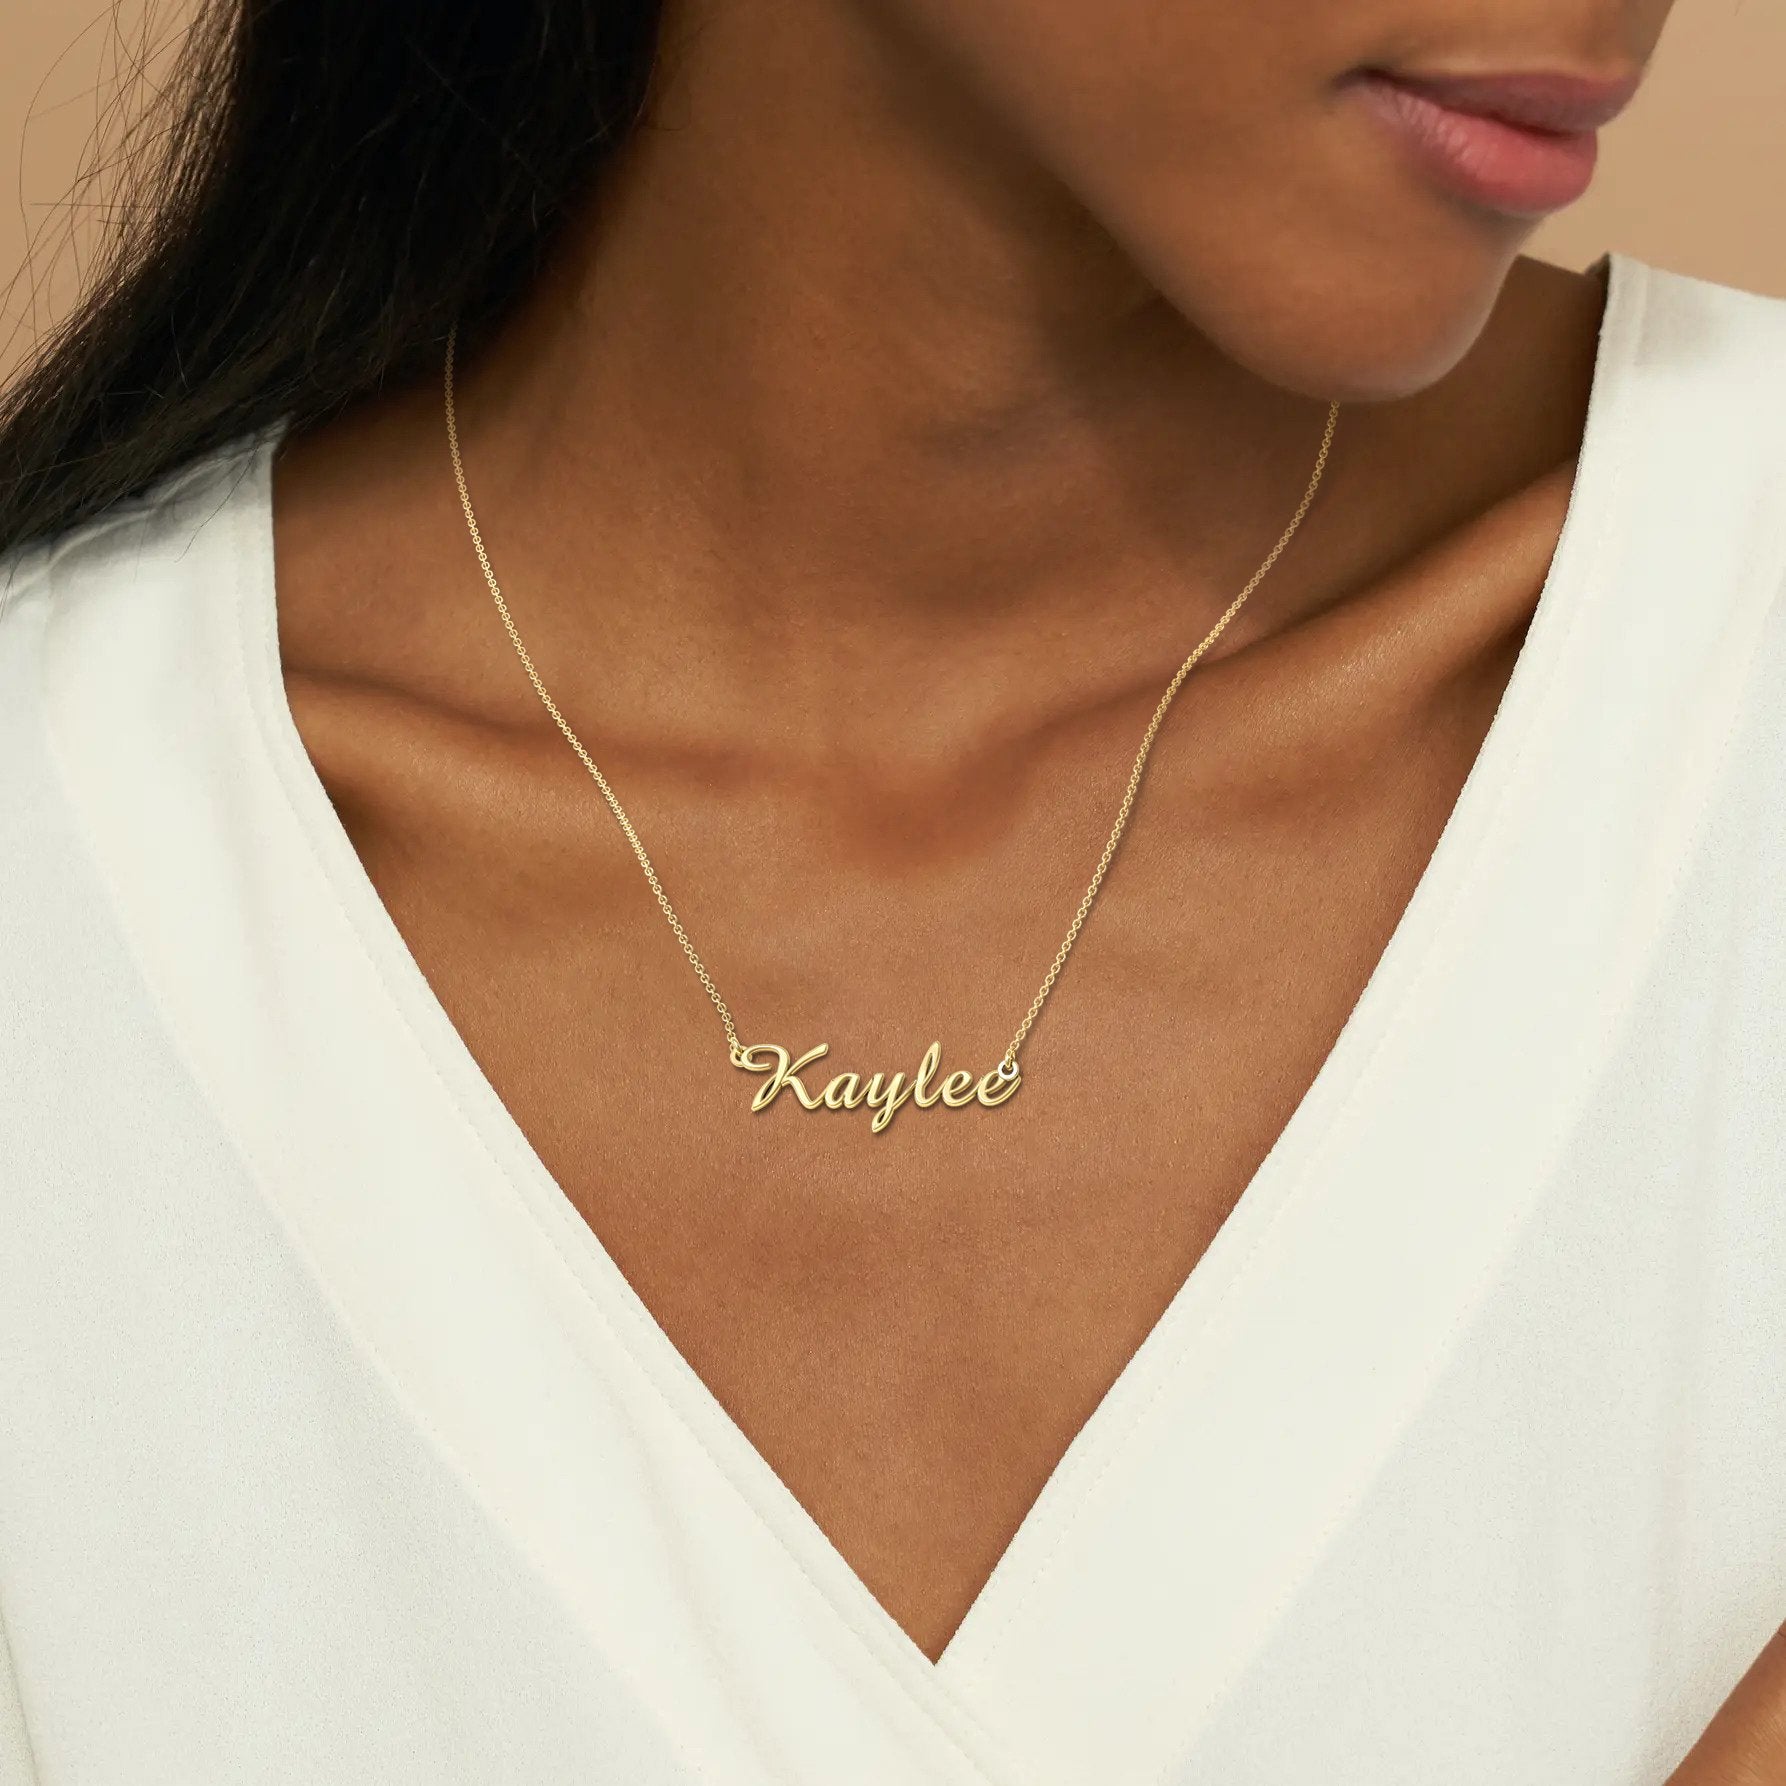 Selenichast Quill Name Necklace